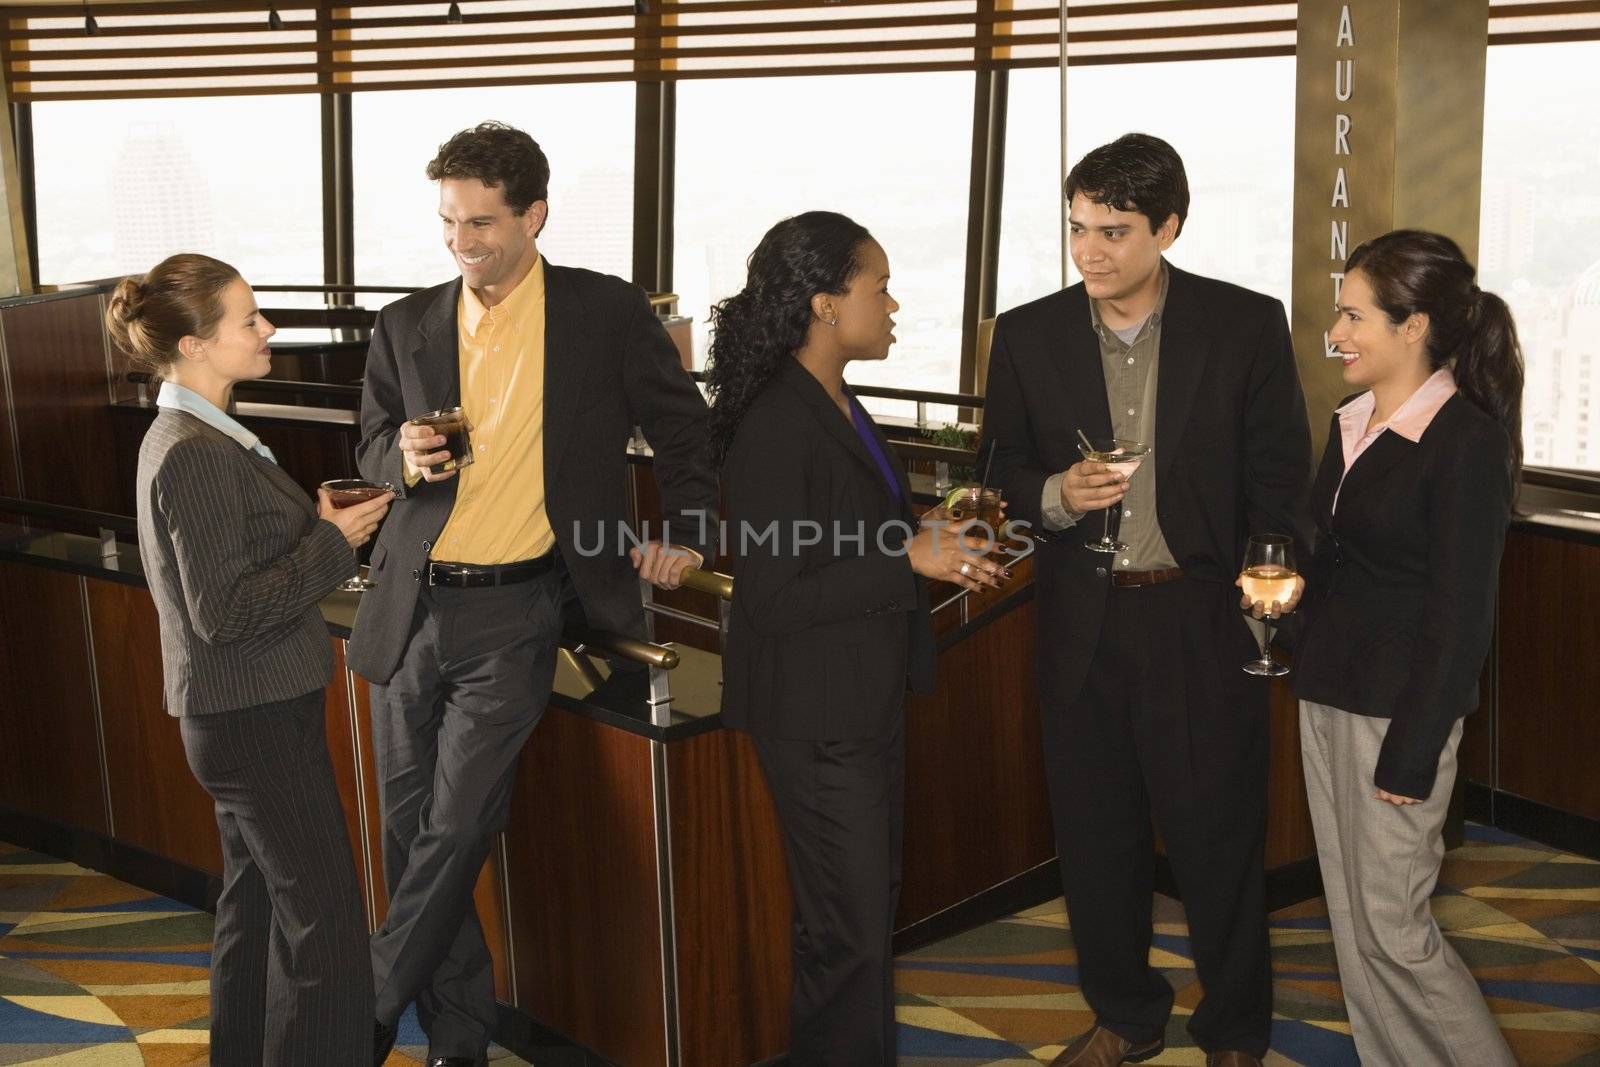 Ethnically diverse group of businesspeople in bar drinking and conversing.